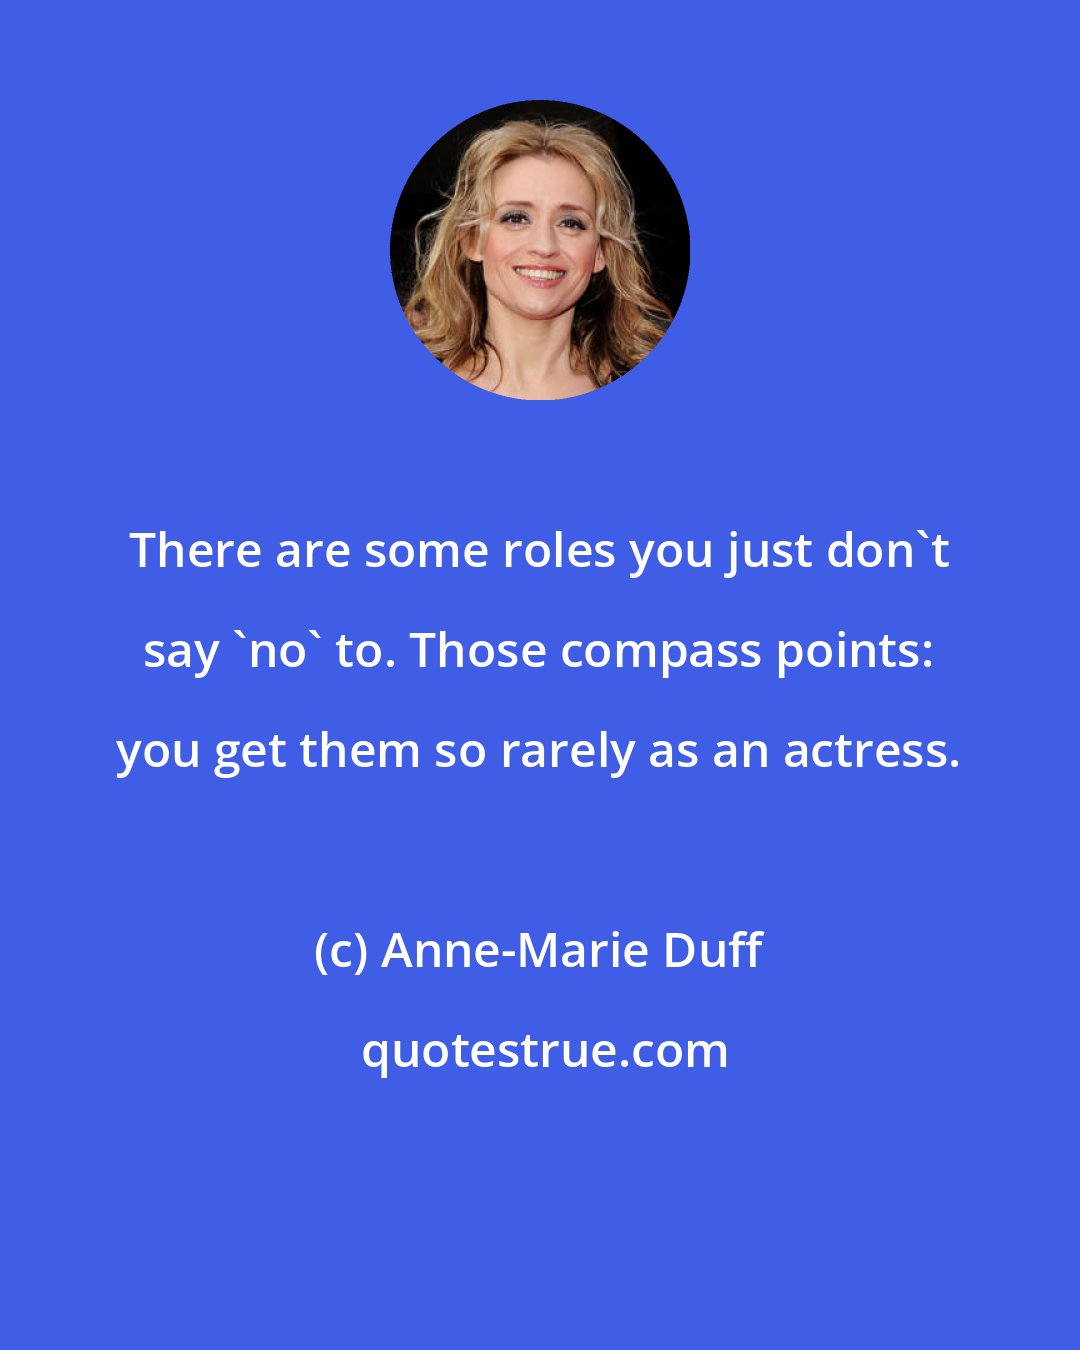 Anne-Marie Duff: There are some roles you just don't say 'no' to. Those compass points: you get them so rarely as an actress.